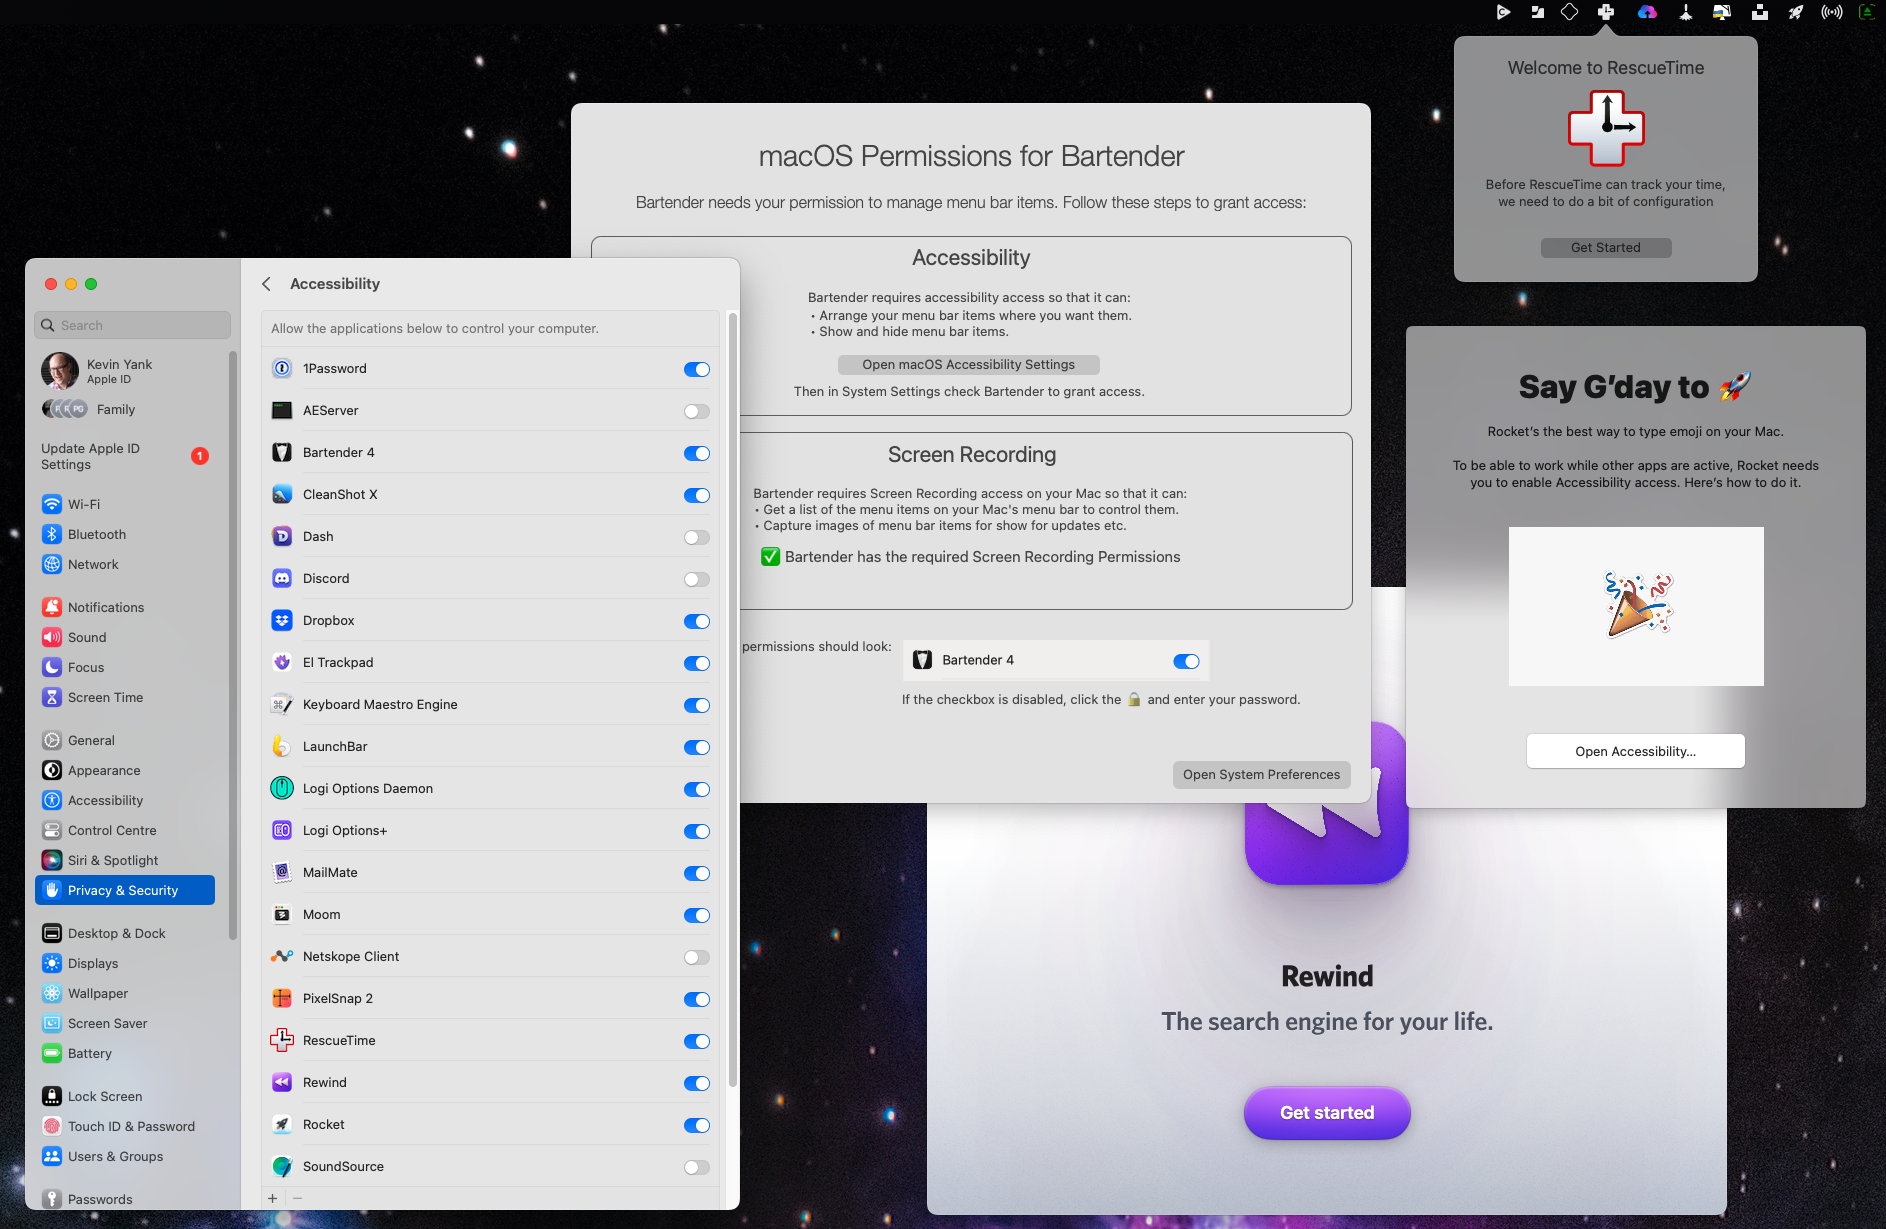 screenshot of macOS Settings showing Accessibility access is enabled for Bartender, Rewind, Rocket, and RescueTime, all of which are nevertheless showing prompts requesting this access